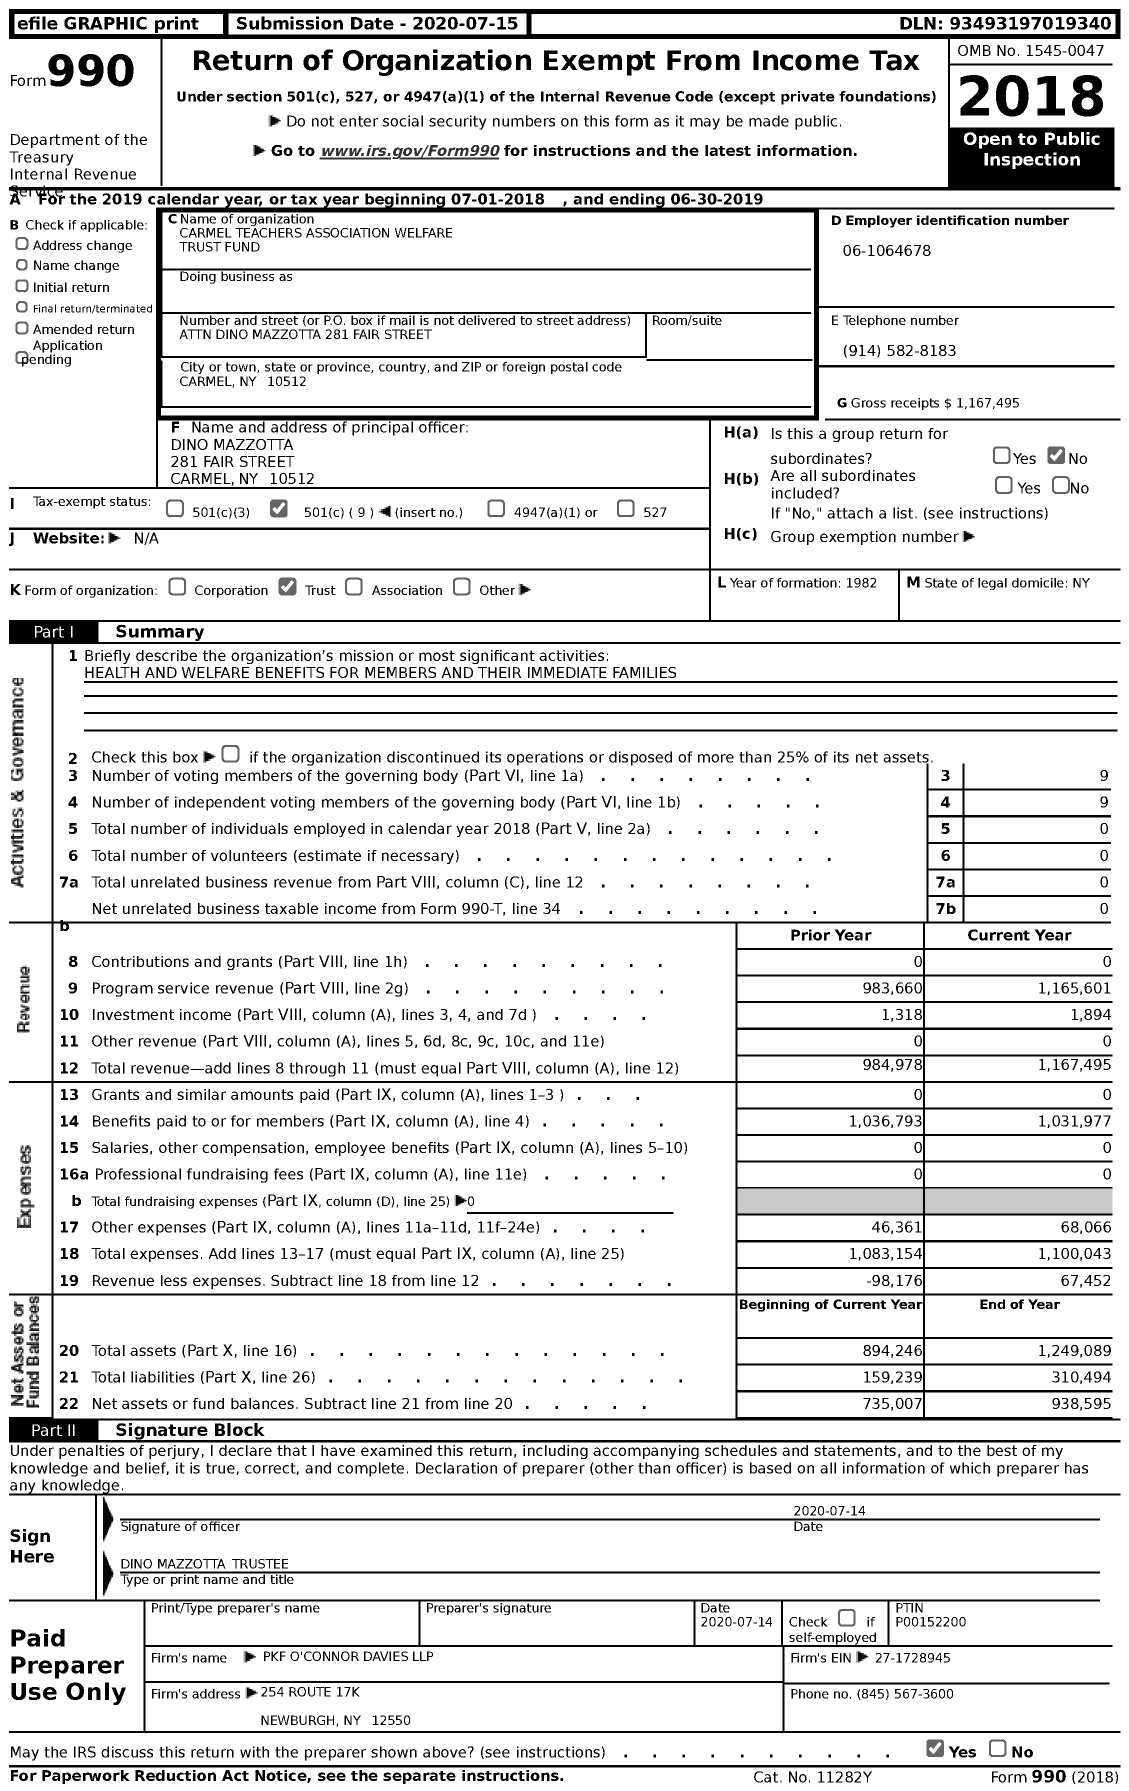 Image of first page of 2018 Form 990 for Carmel Teachers Association Welfare Trust Fund